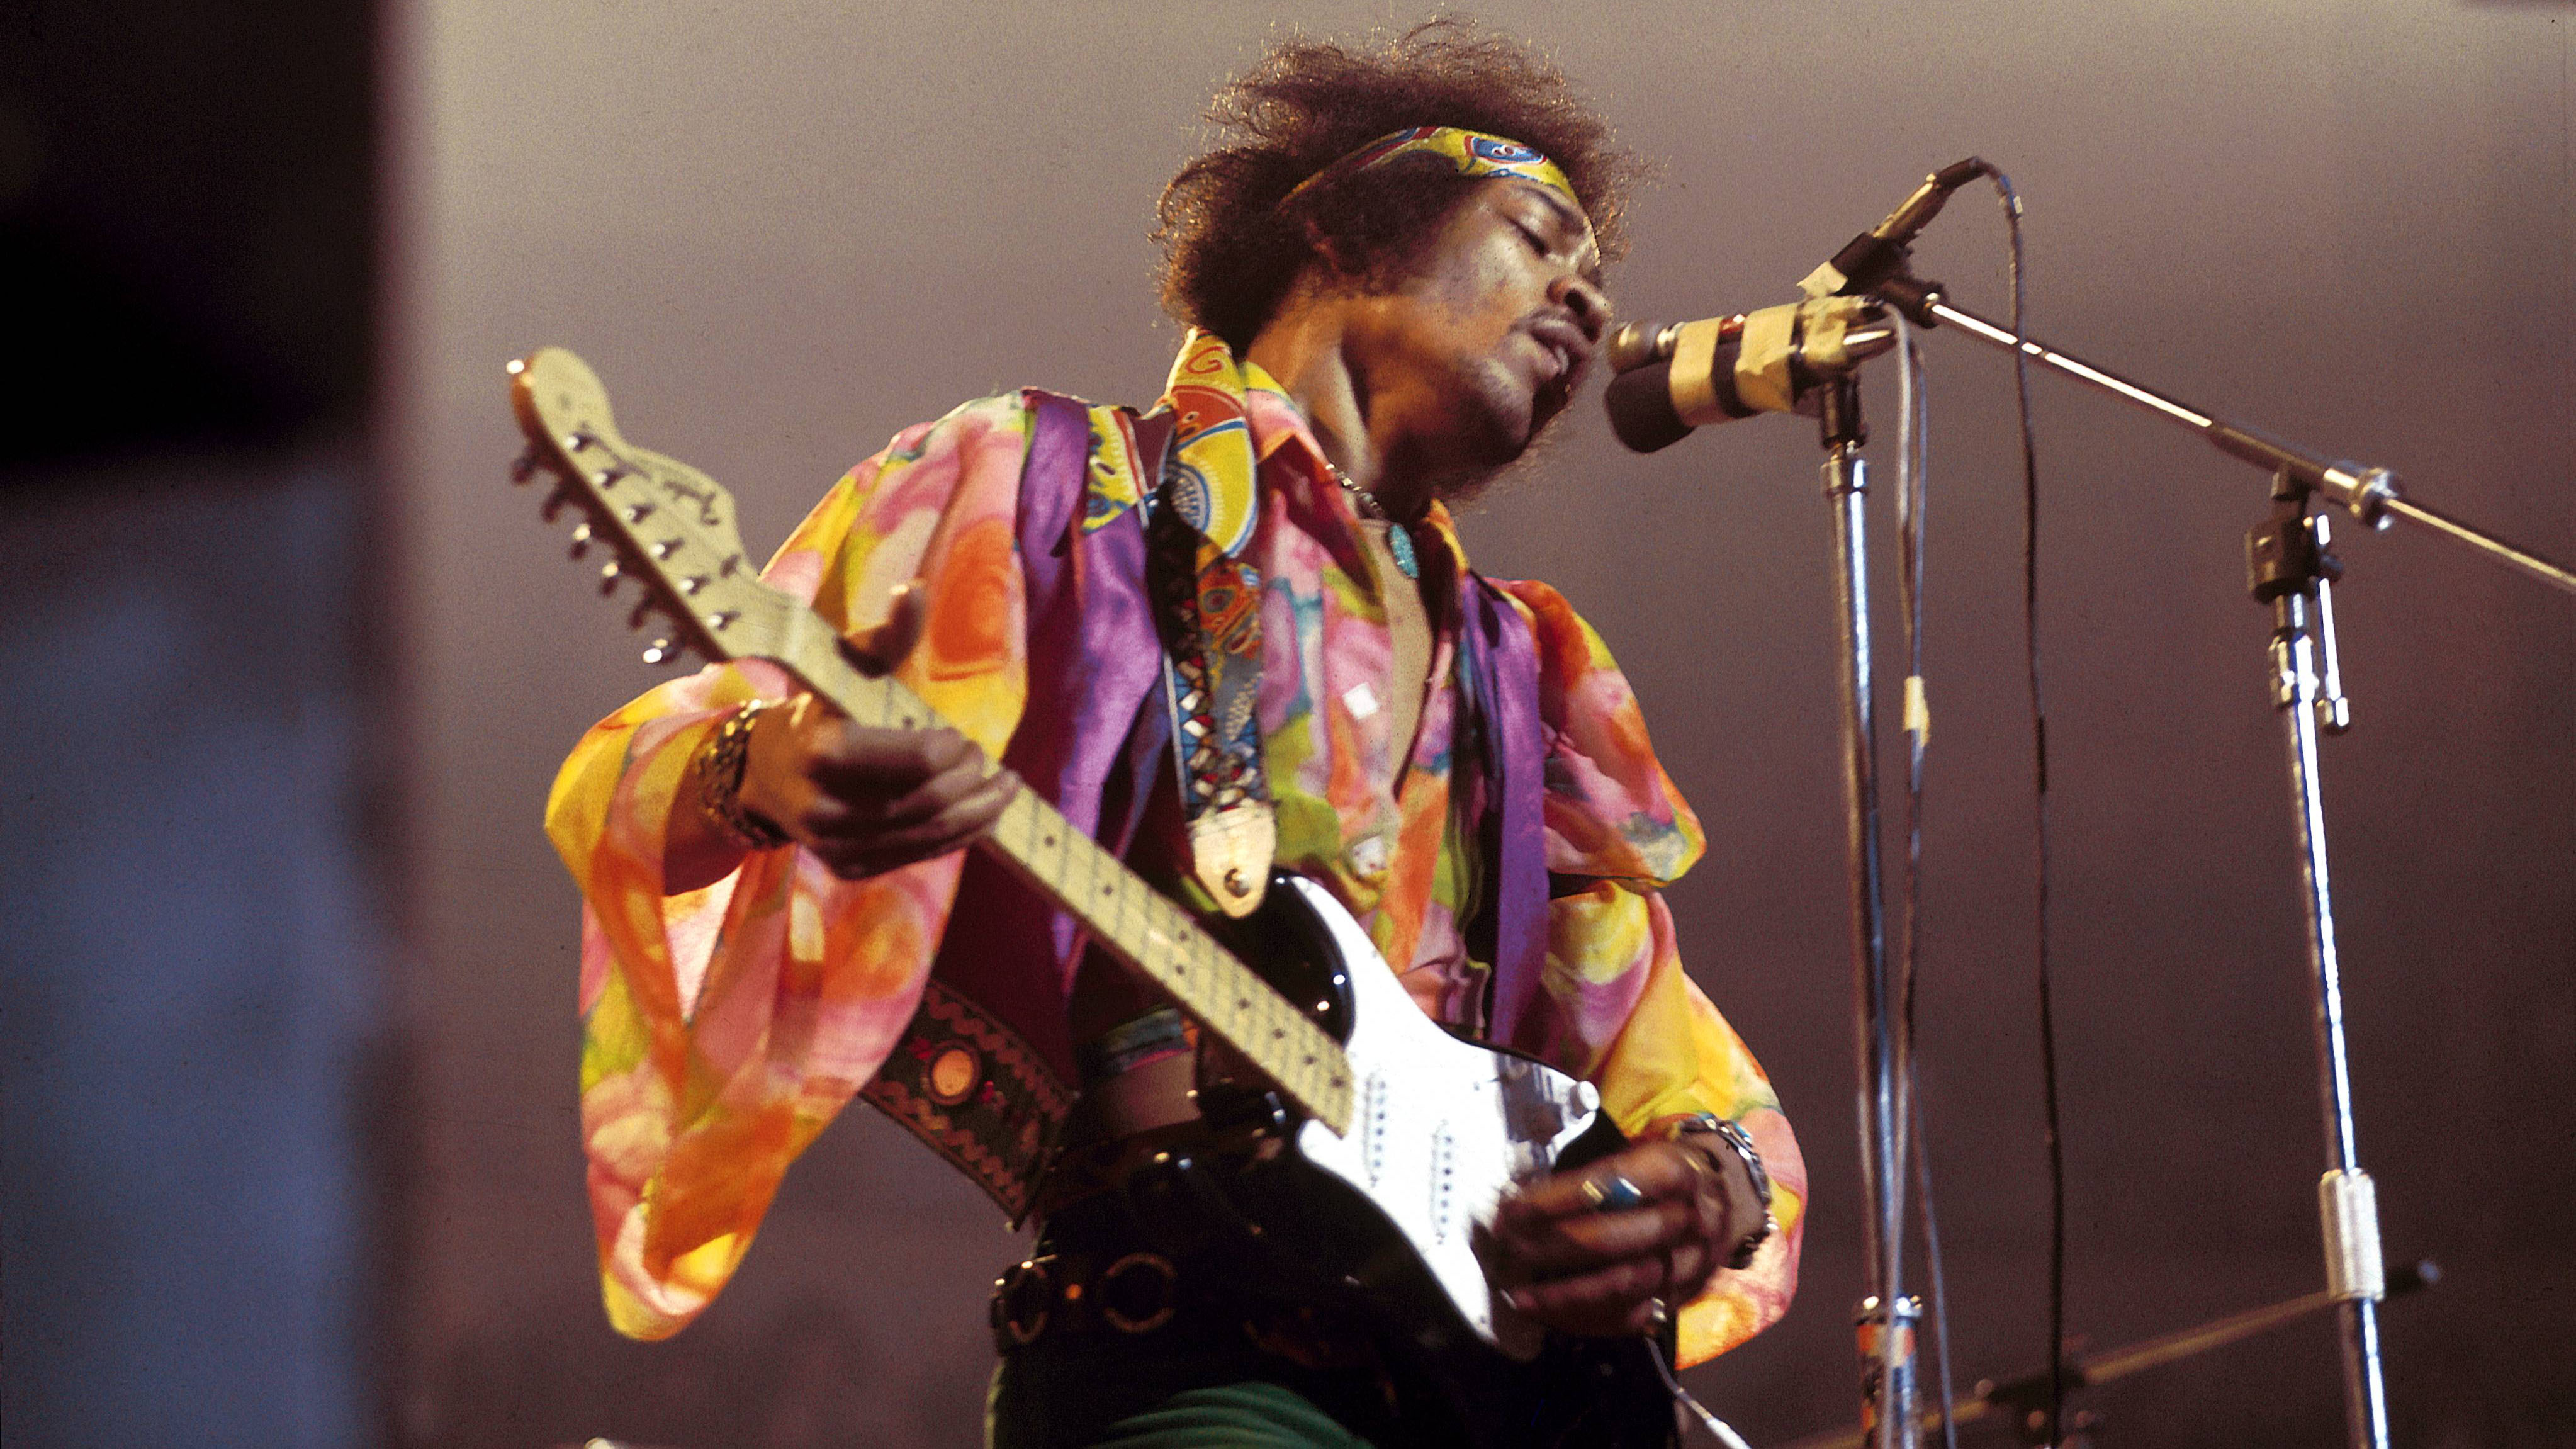 Jimi Hendrix's 20 Greatest Guitar Moments, Ranked All Things Guitar